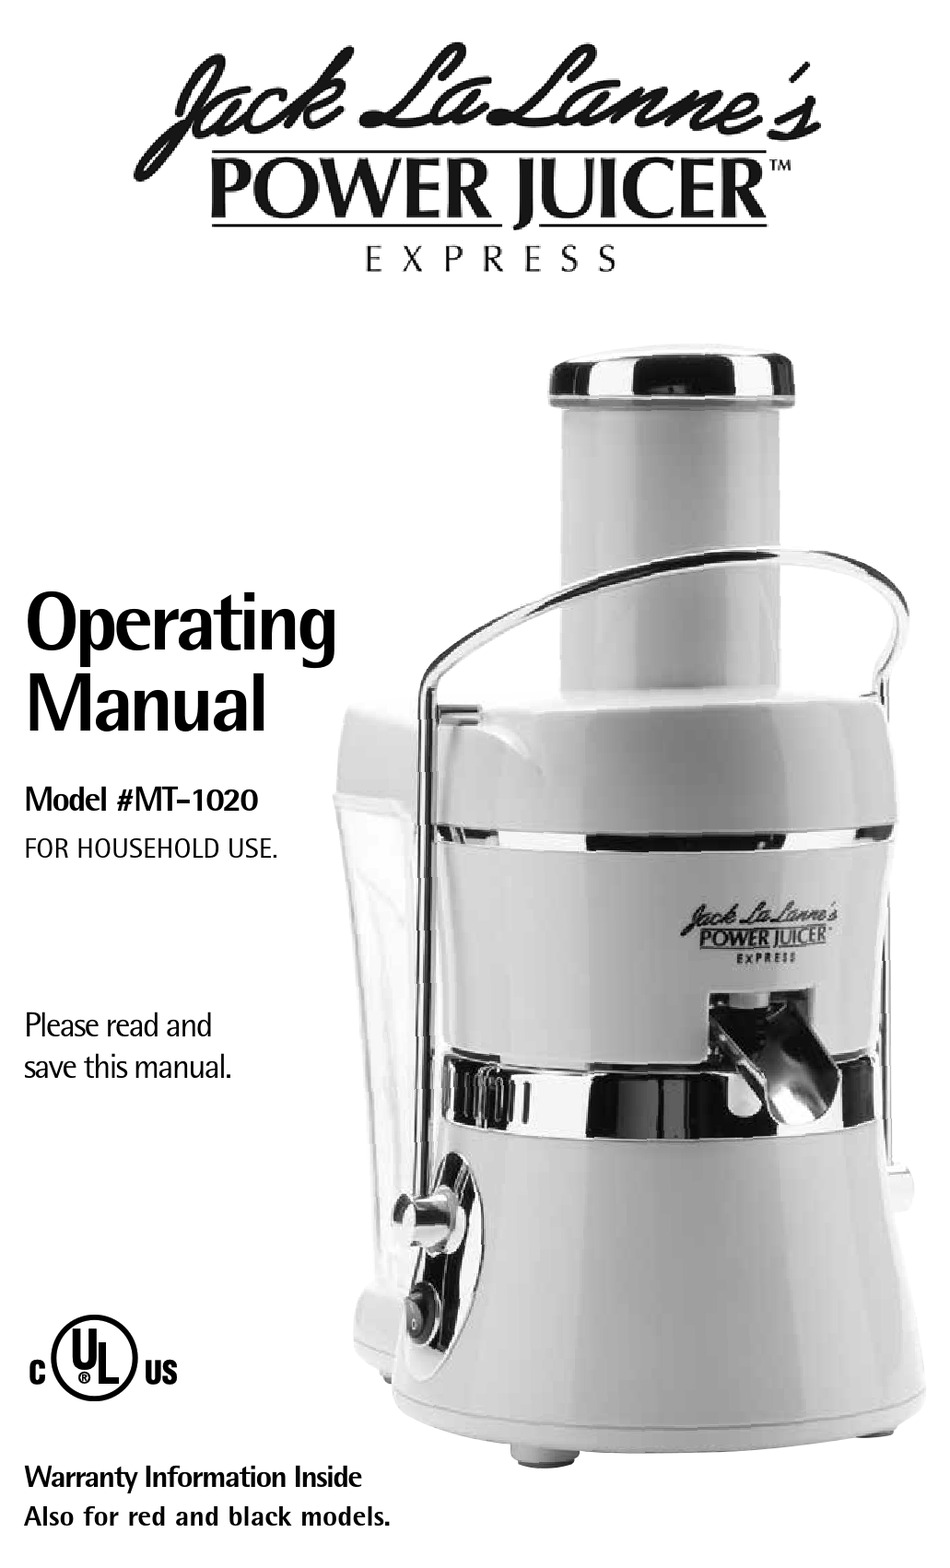 New in Open Box Jack LaLanne Power Juicer Ultimate Chrome Manual CD